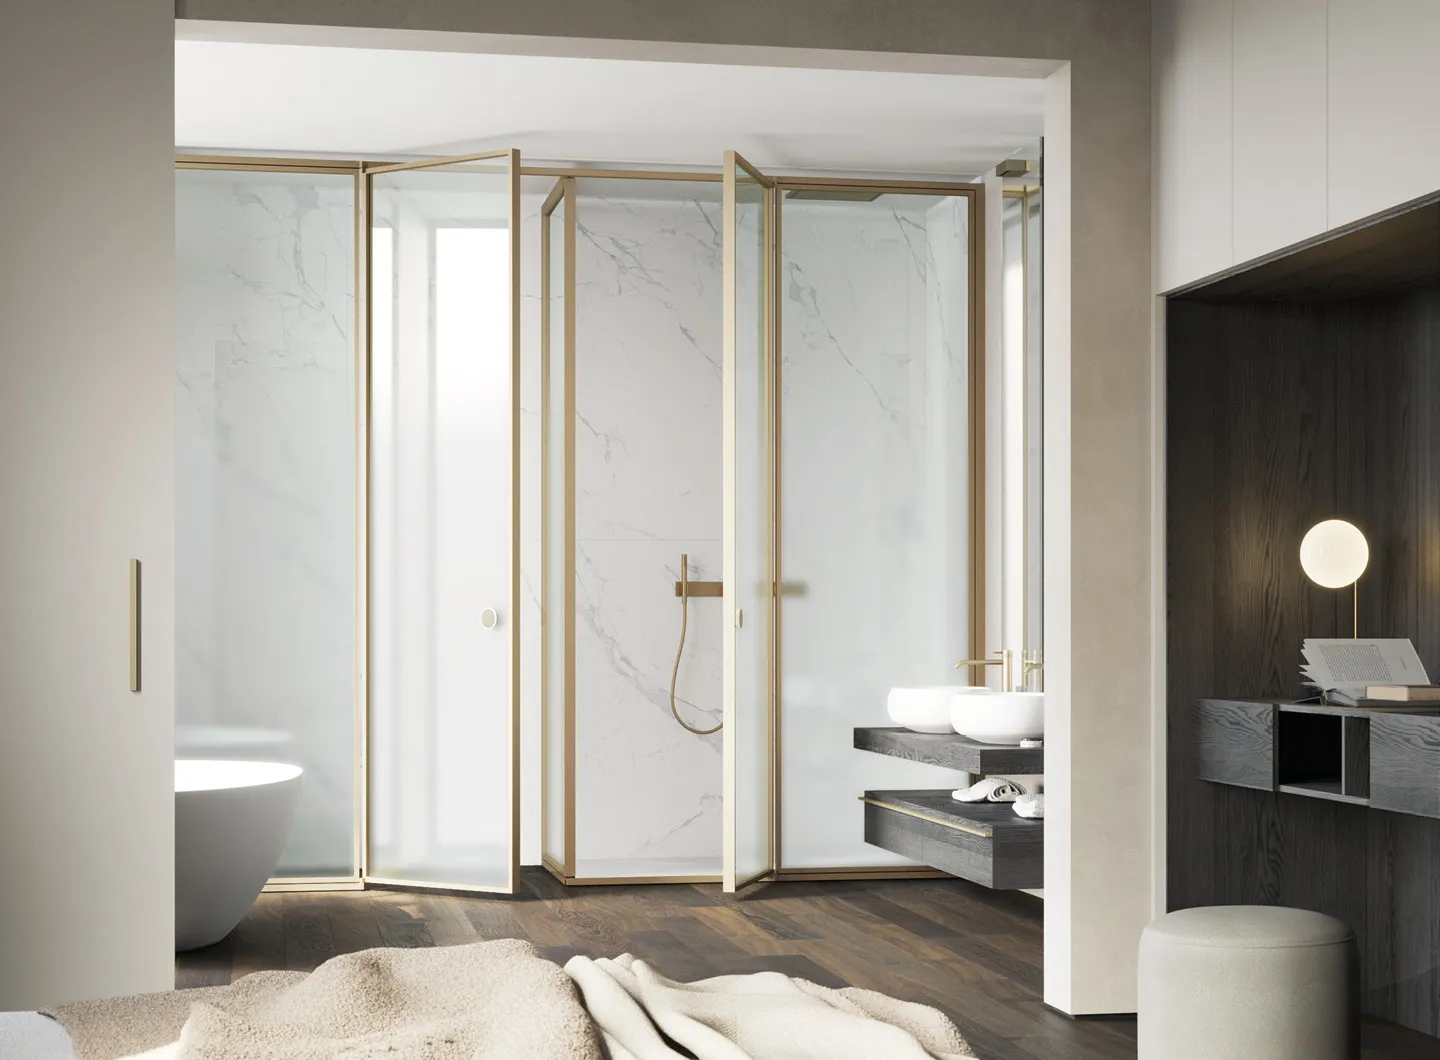 Vismaravetro - Glass partition walls for bathrooms and contract orders - Suite